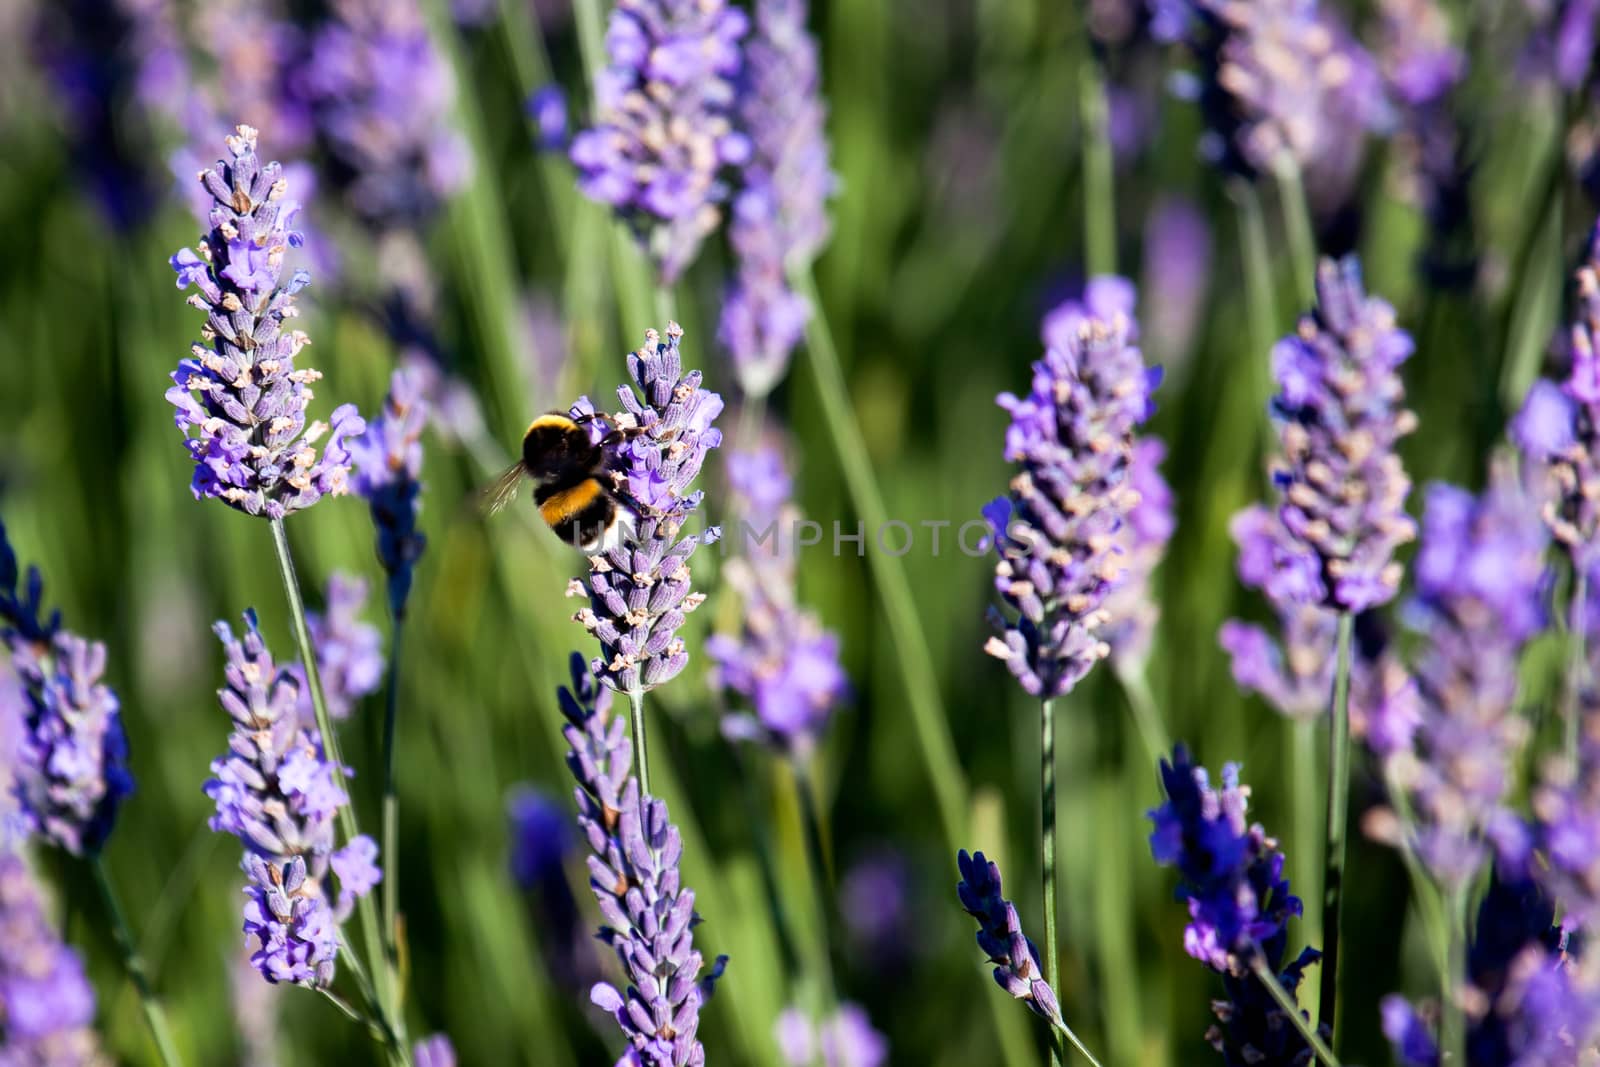 Bumble Bee on Lavender by phil_bird